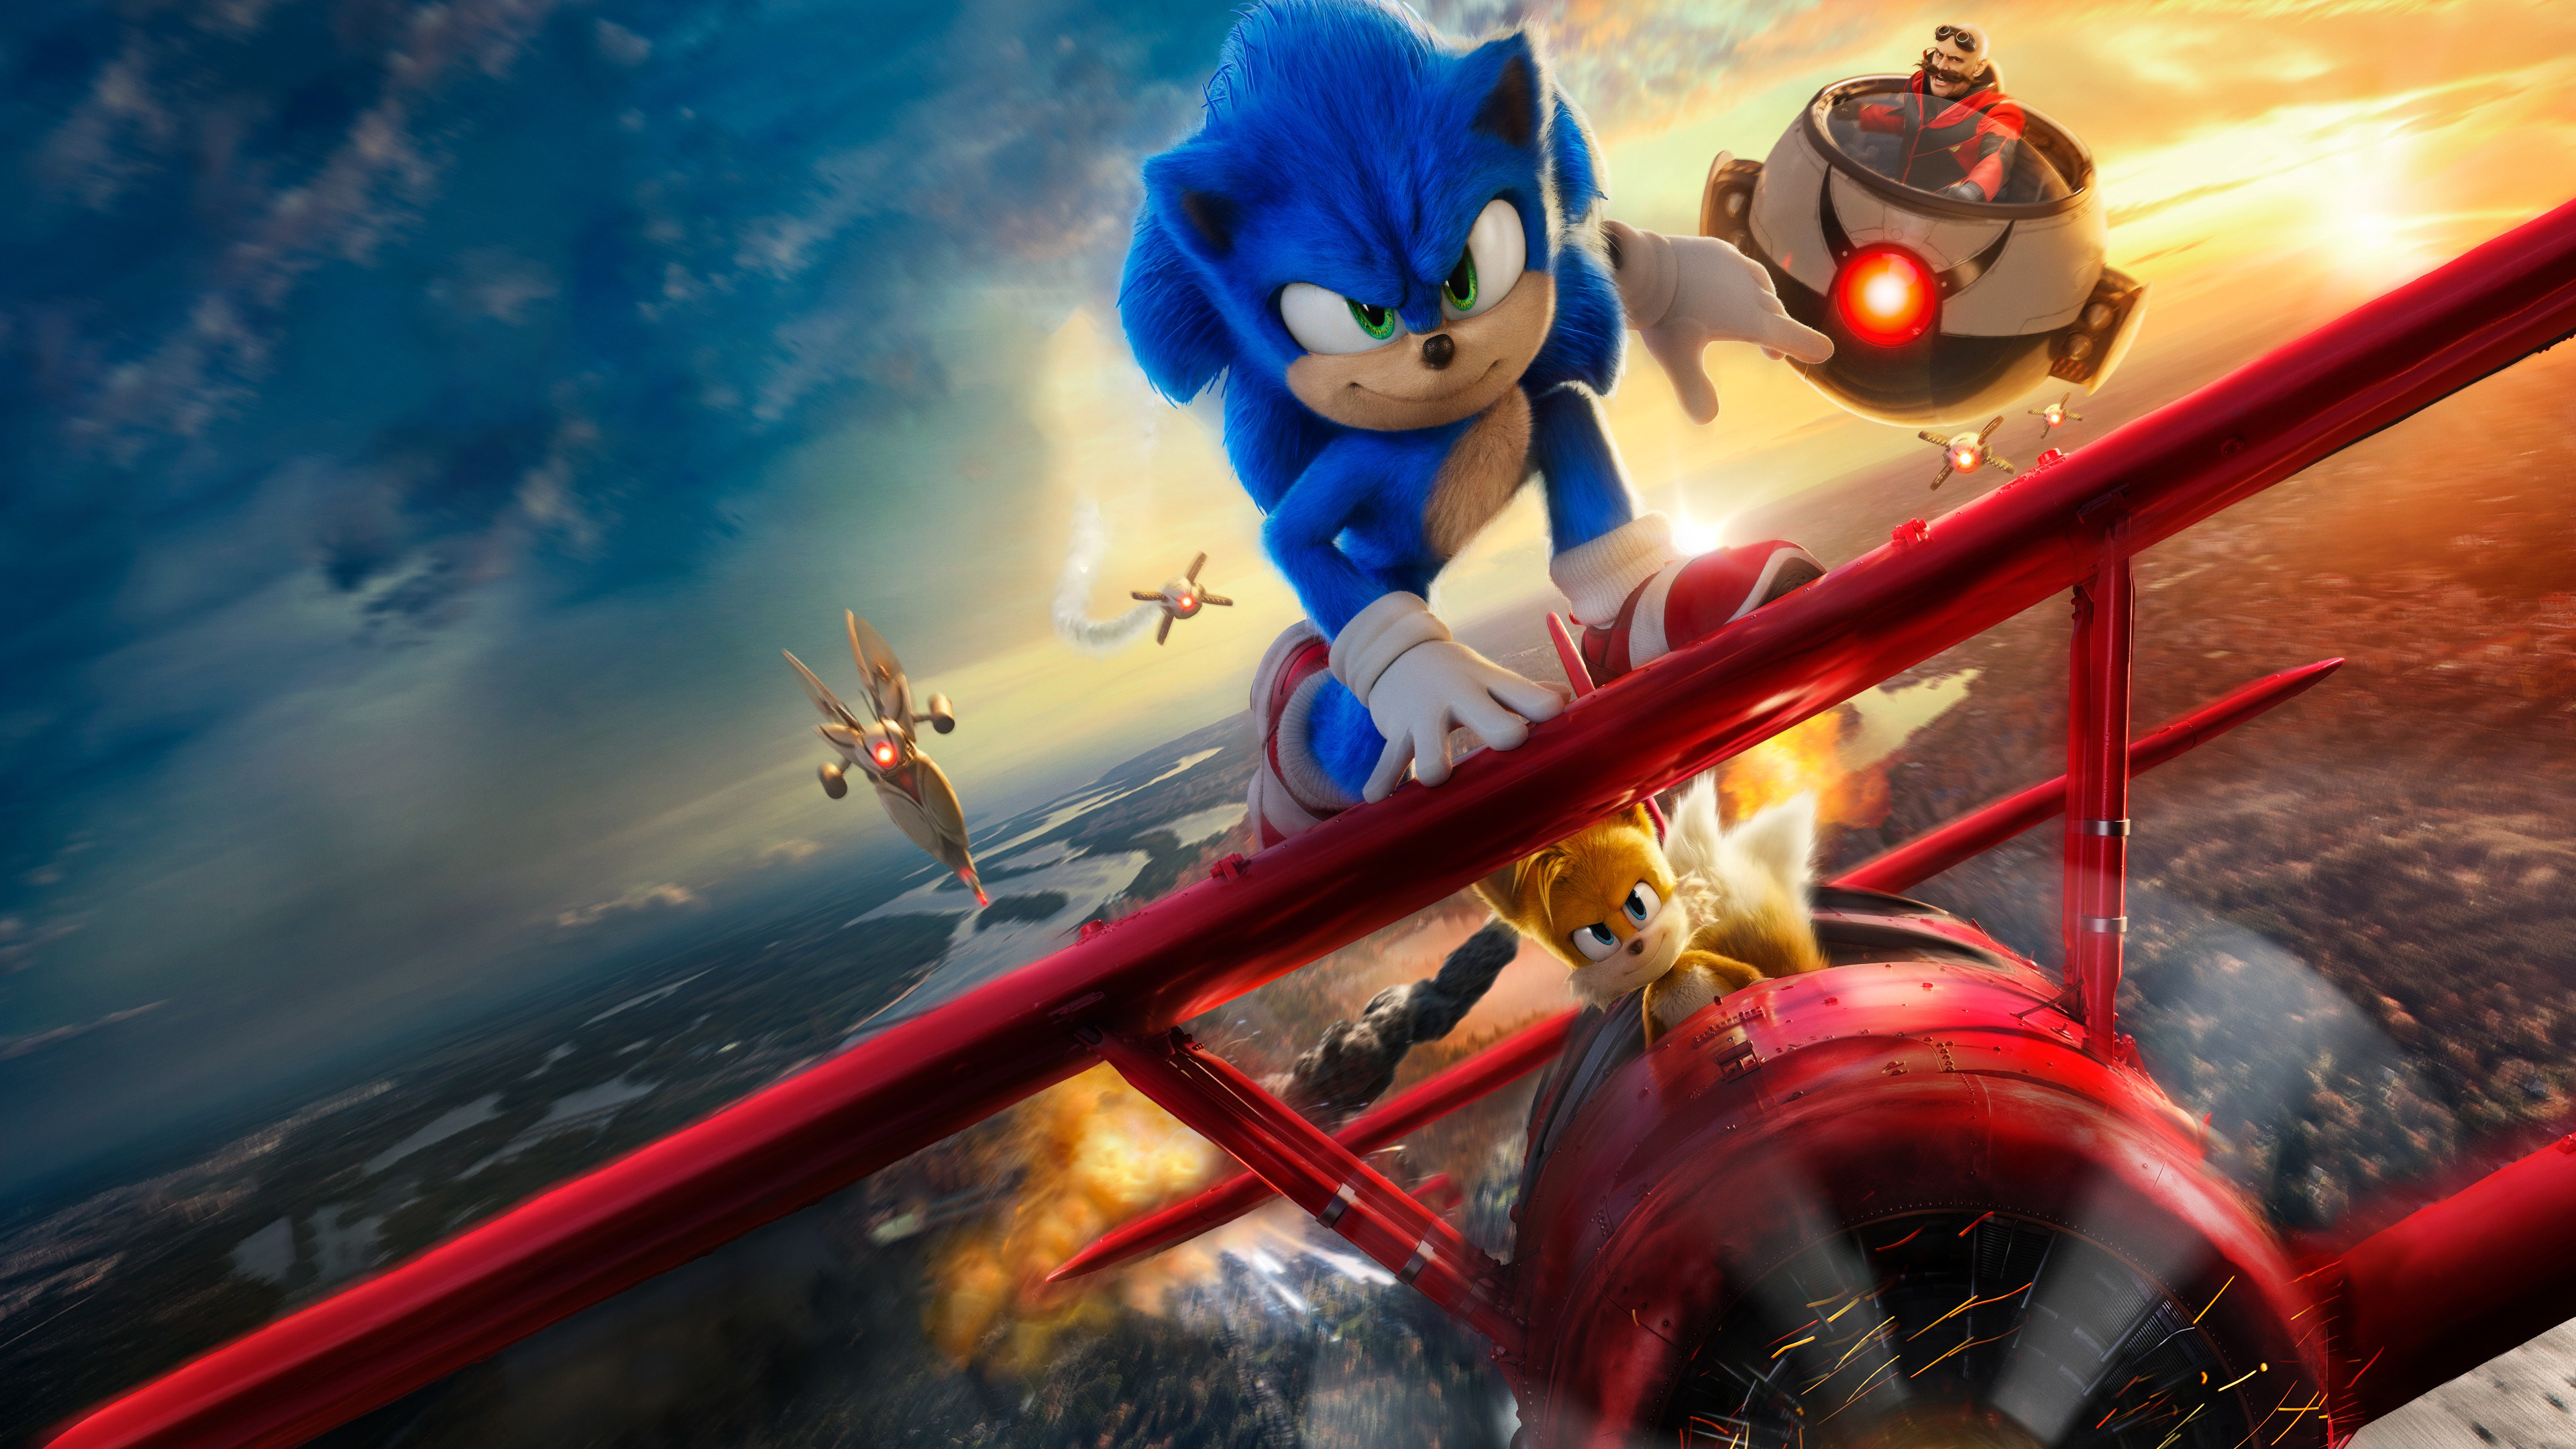 General 3840x2160 Sonic Sonic 2 The Movie Sonic the Hedgehog Paramount Sega Dr. Robotnik Jim Carrey Tails (character) video game characters movies digital art